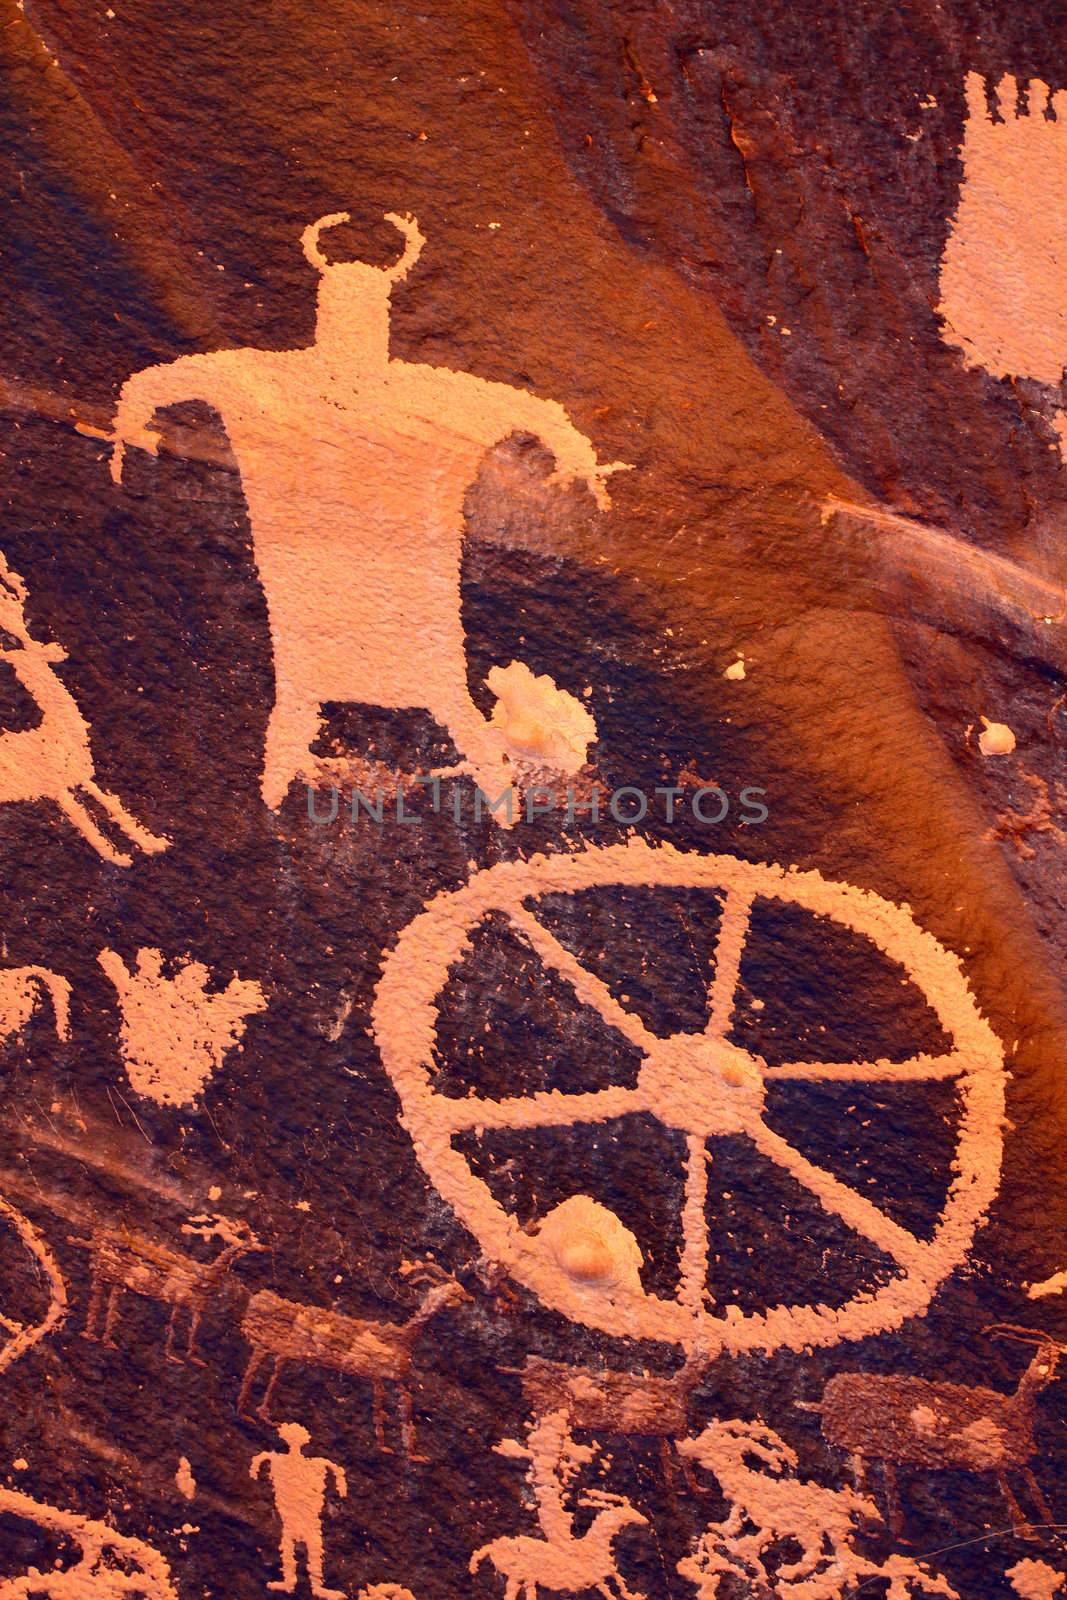 Petroglyphs on Newspaper Rock by Wirepec